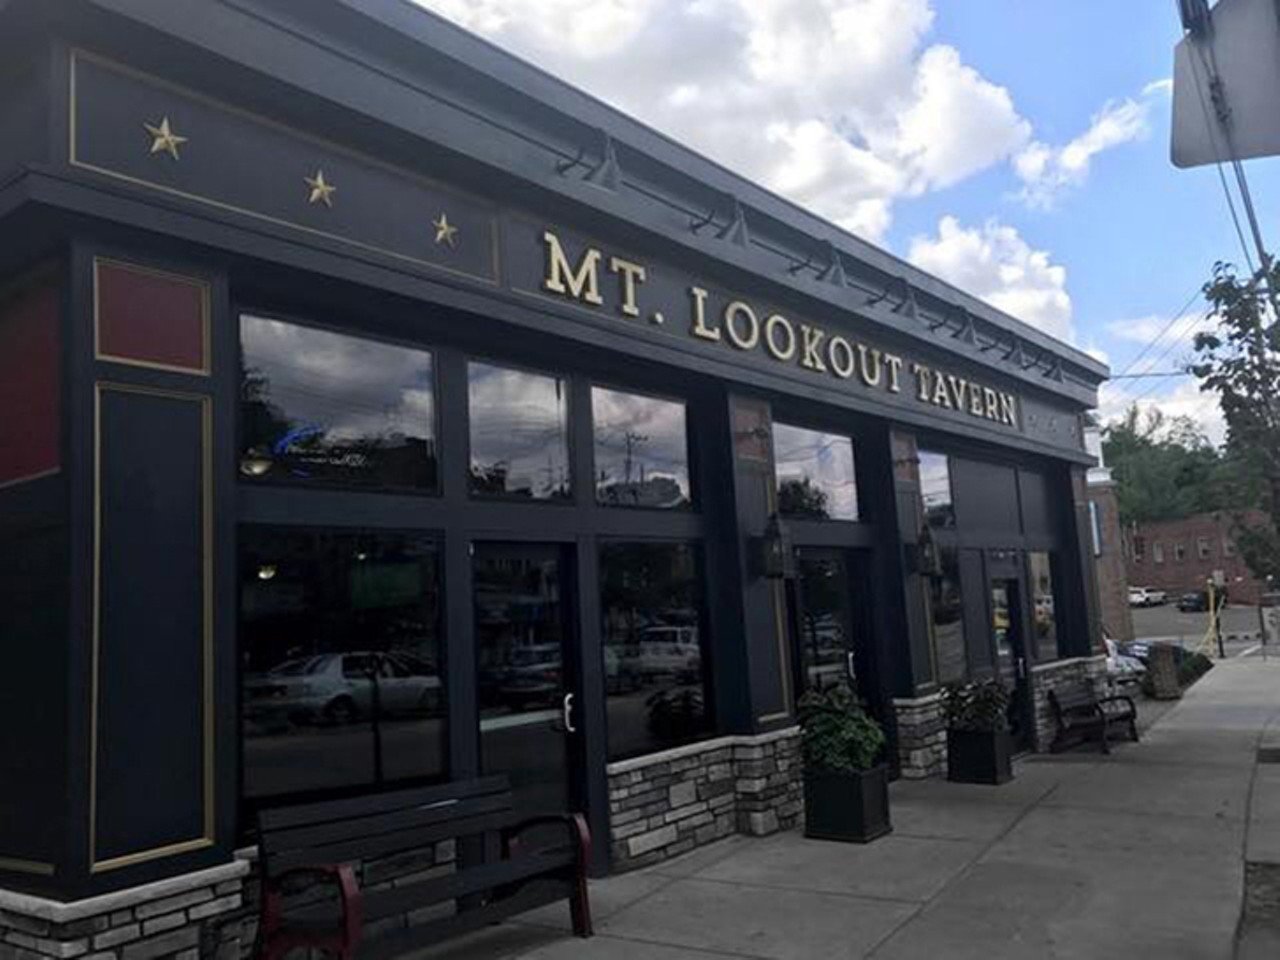 Mt. Lookout Tavern
3209 Linwood Ave., Mount Lookout
This sporty sister bar to the Oak Tavern has been serving Cincinnati for over 40 years. Wings come classic or smoked and you can pair them with sports-centric flavors like Xavier Tangy and Bearcat. Photo via Facebook/MtLookoutTavern